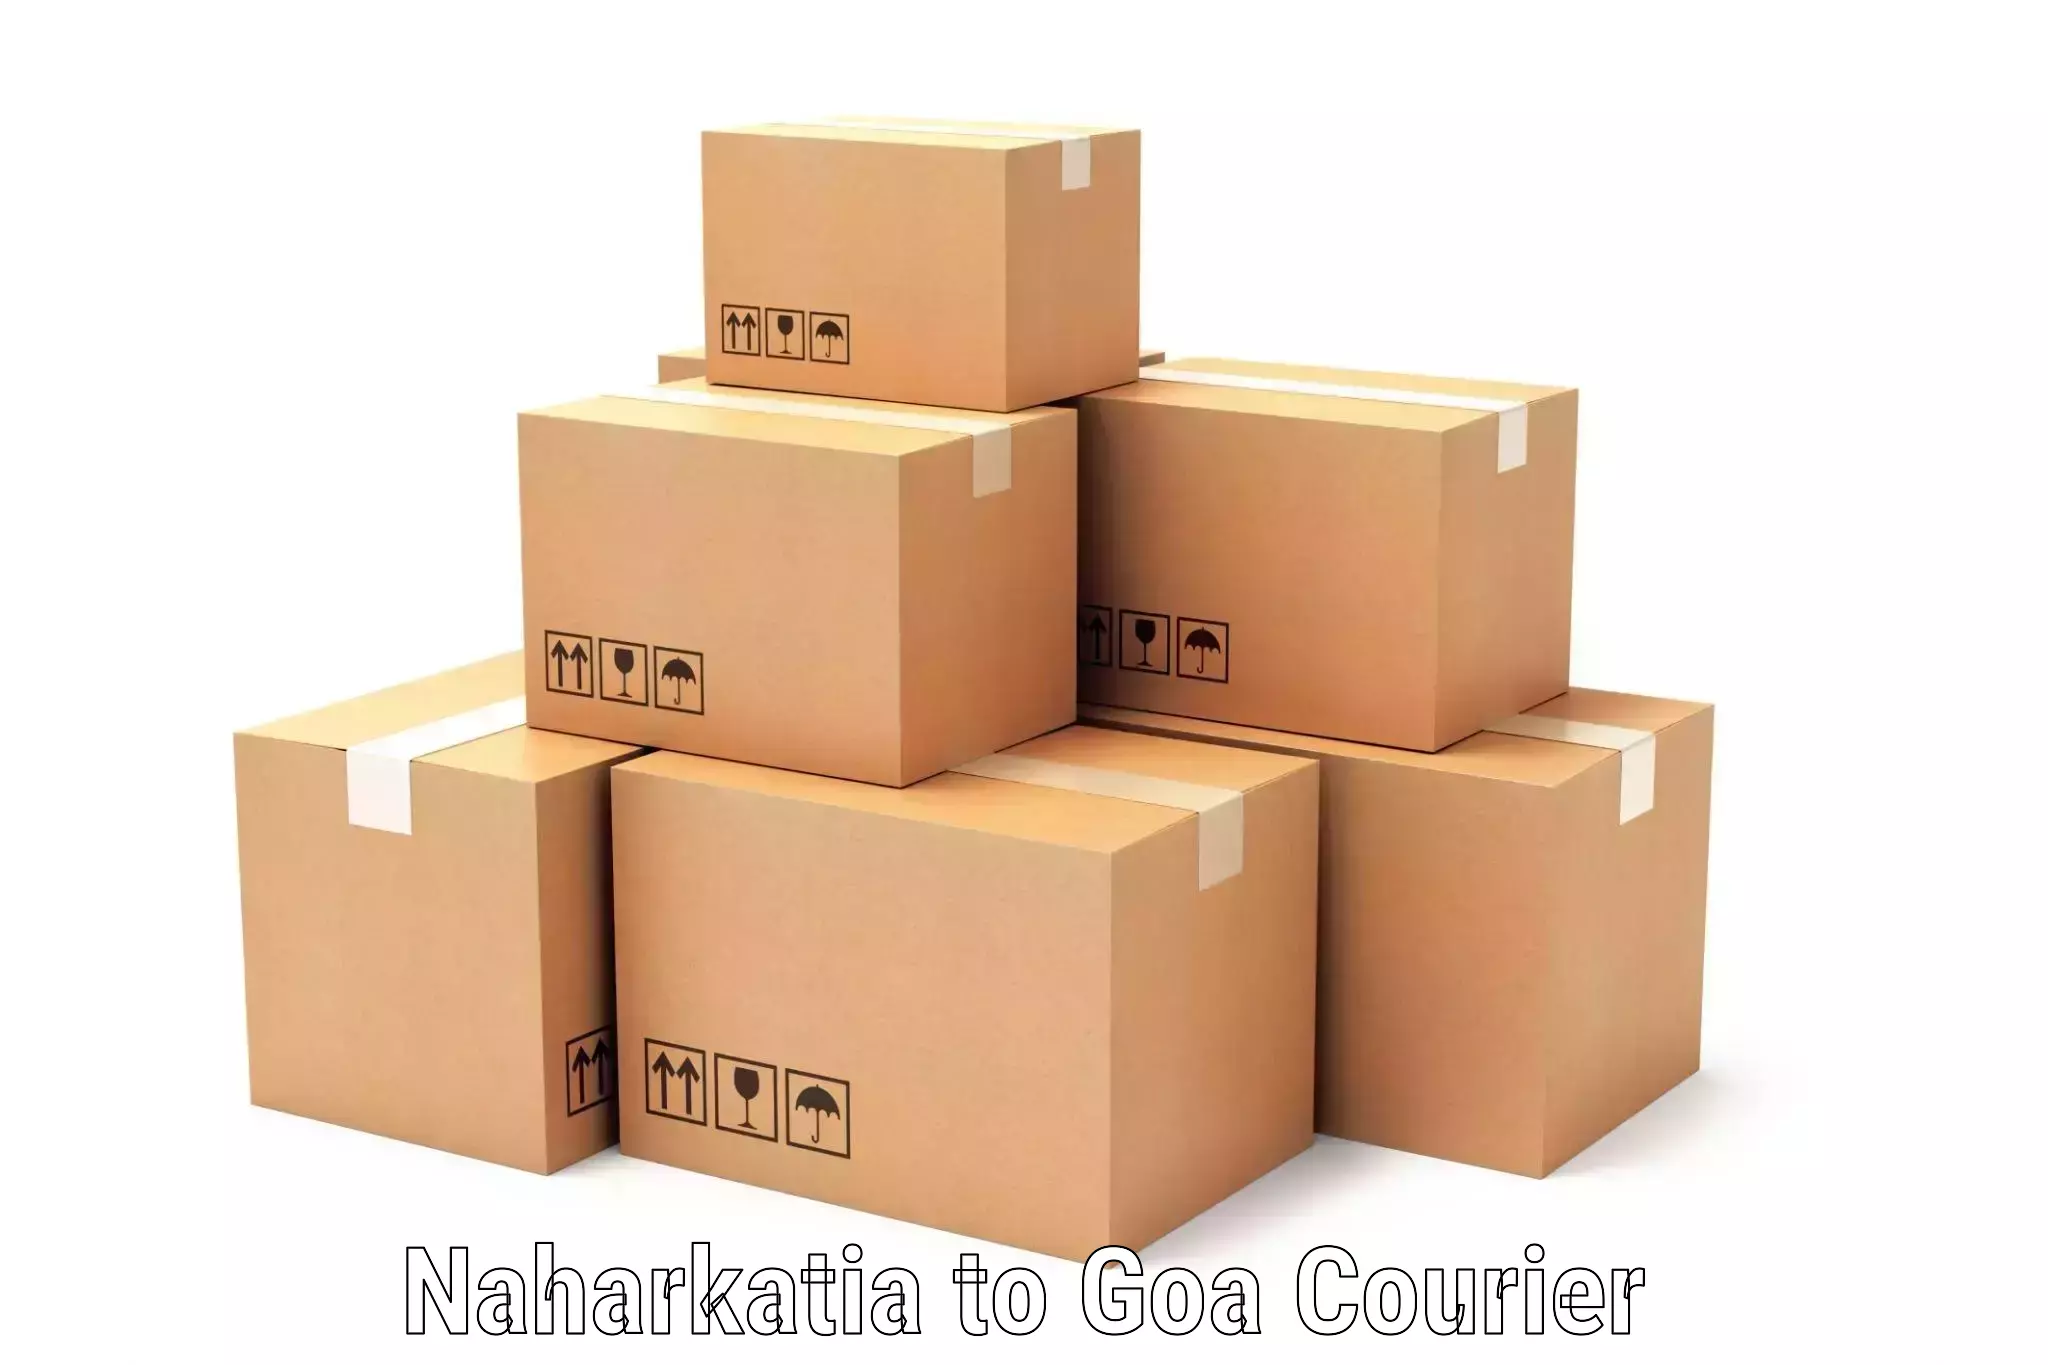 Cash on delivery service in Naharkatia to South Goa